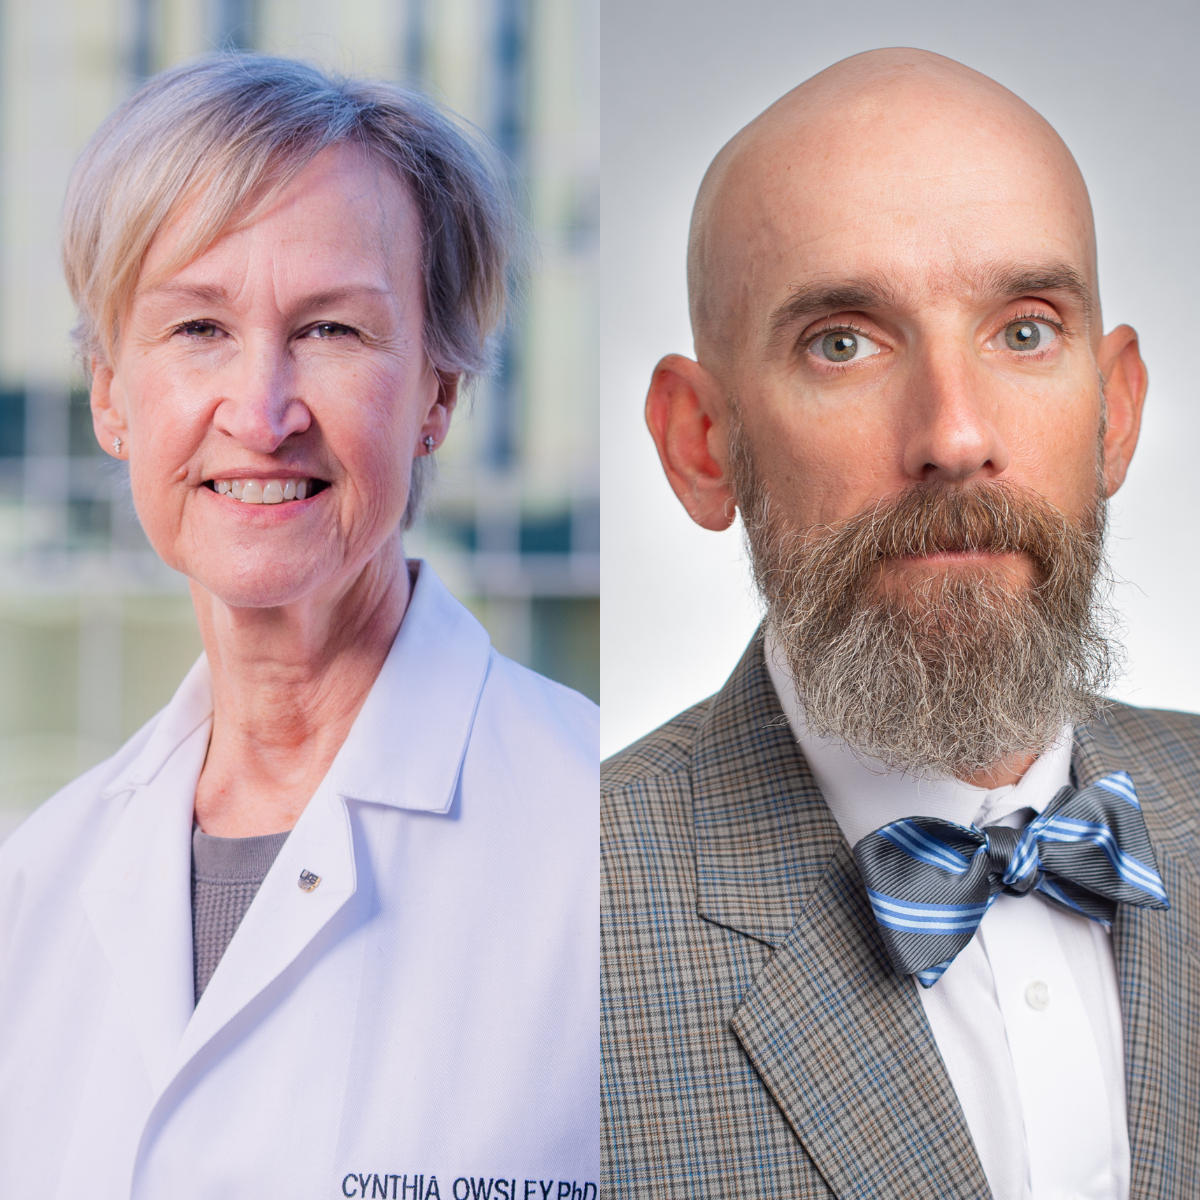 Owsley and McGwin Receive $1.2 Million One-Year Grant from NIH’s Bridge2AI Program